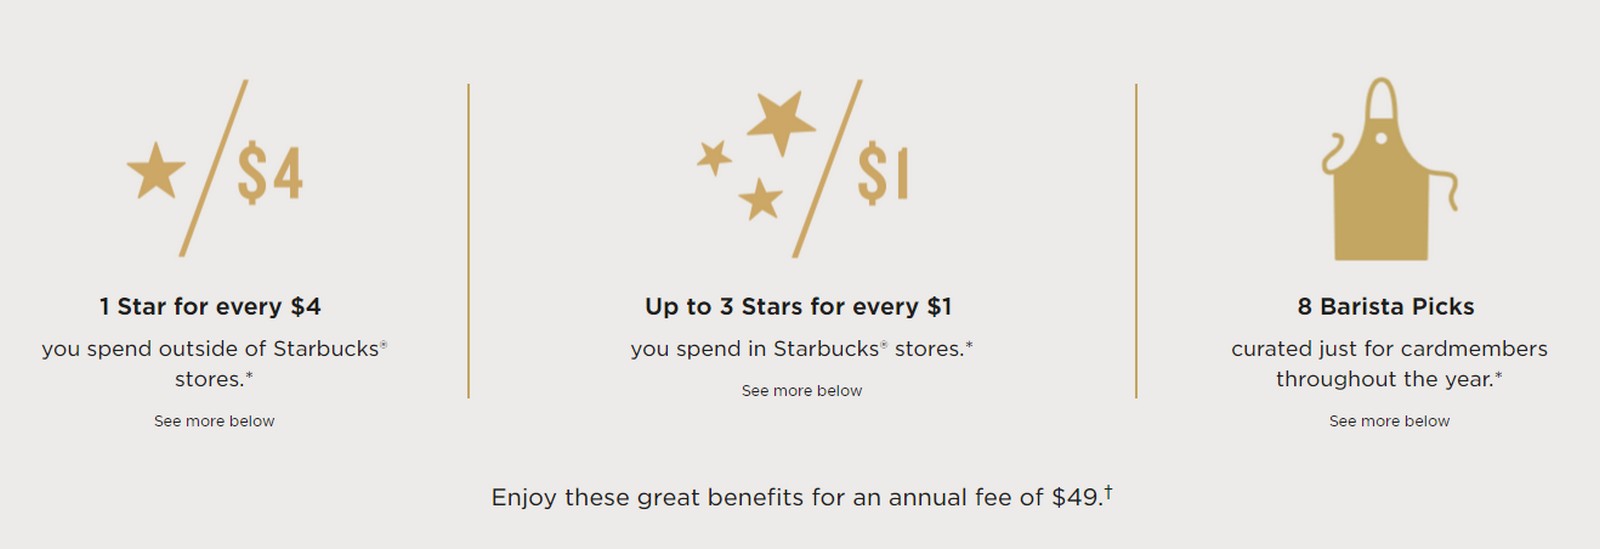 Chase Starbucks Credit Card Review, Should You Get It?